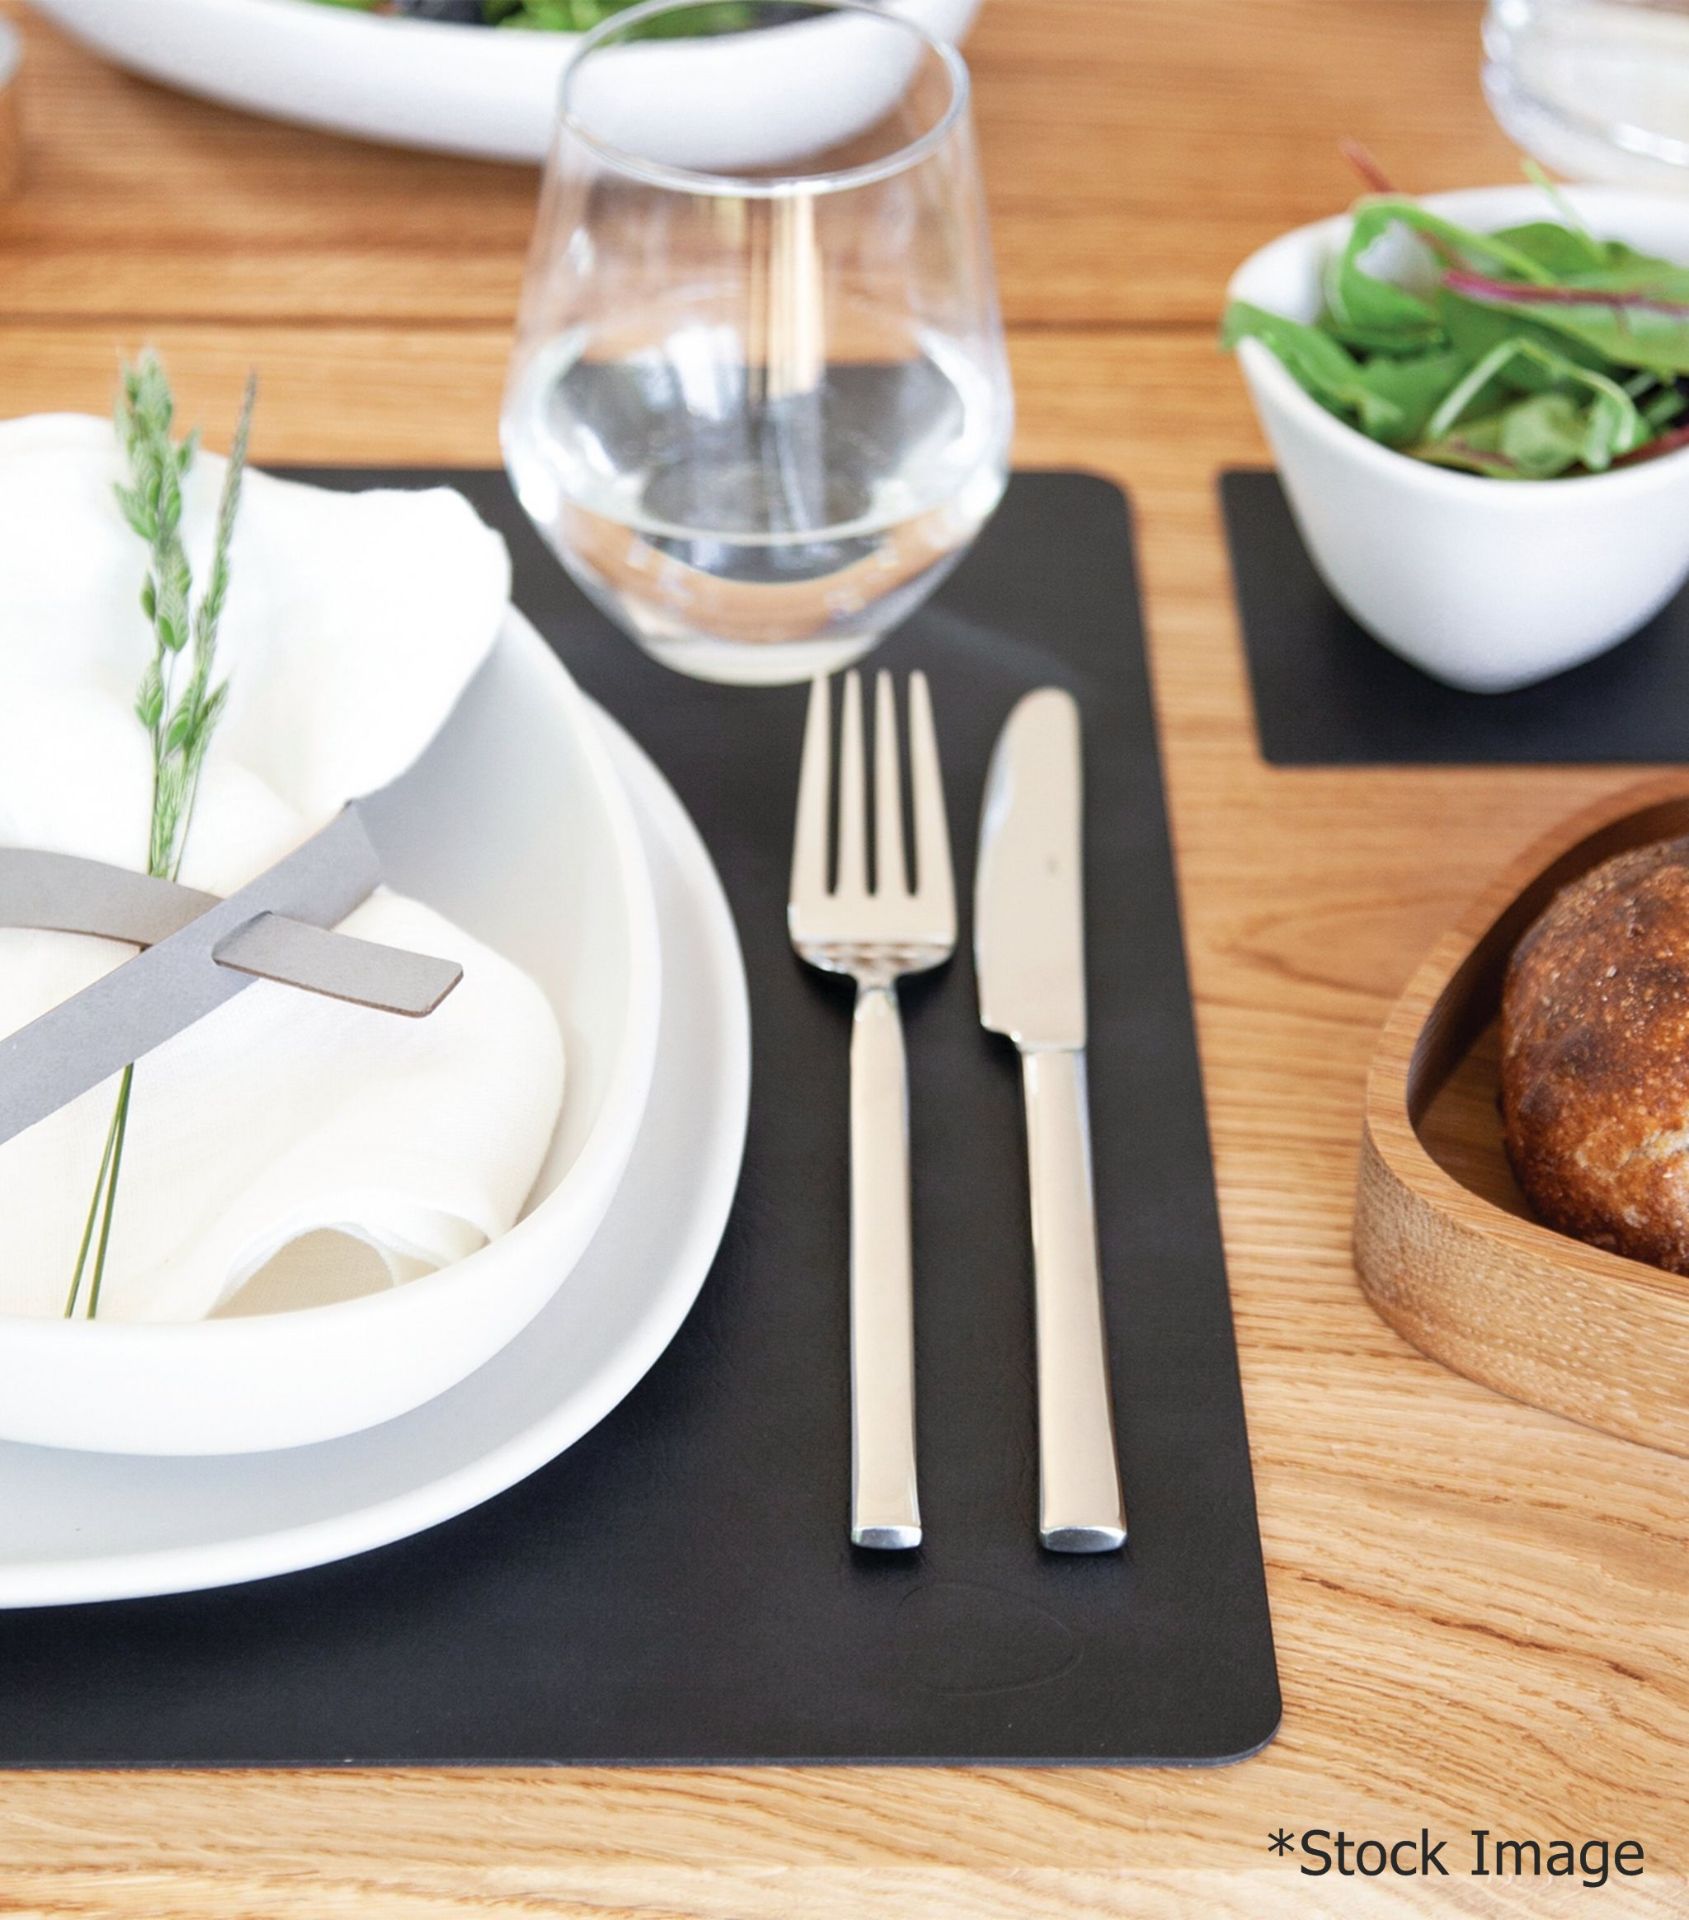 Set Of 4 x LINDDNA 'CLOUD' Recycled Leather Double-sided Placemats In Black & Brown - RRP £109.00 - Image 5 of 9